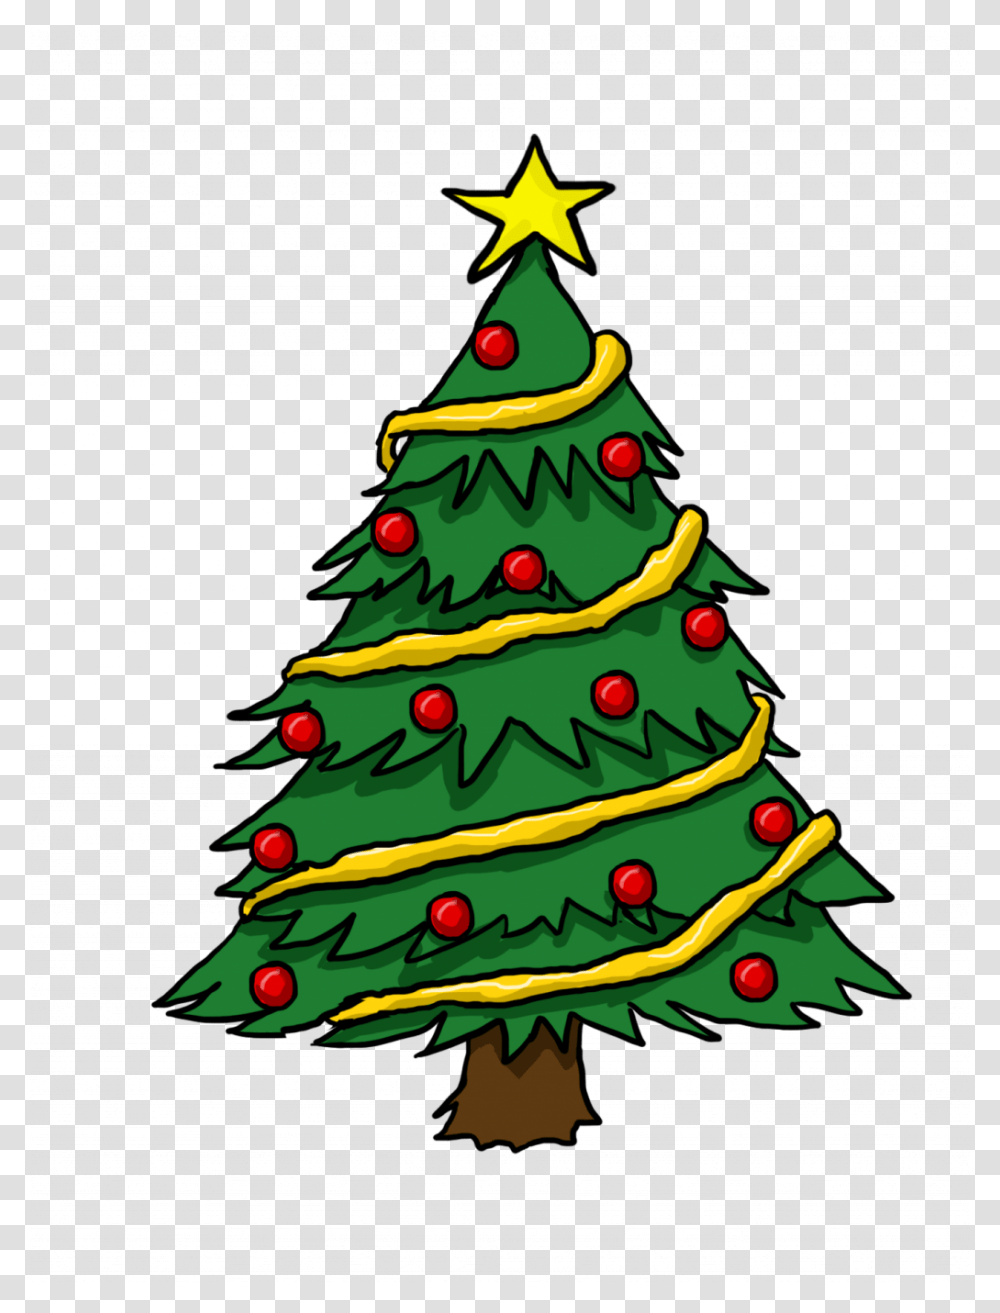 Cliparts For Free Download Evergreen Clipart Tree Cutout Simple Christmas Tree Cartoon, Plant, Ornament, Birthday Cake, Dessert Transparent Png